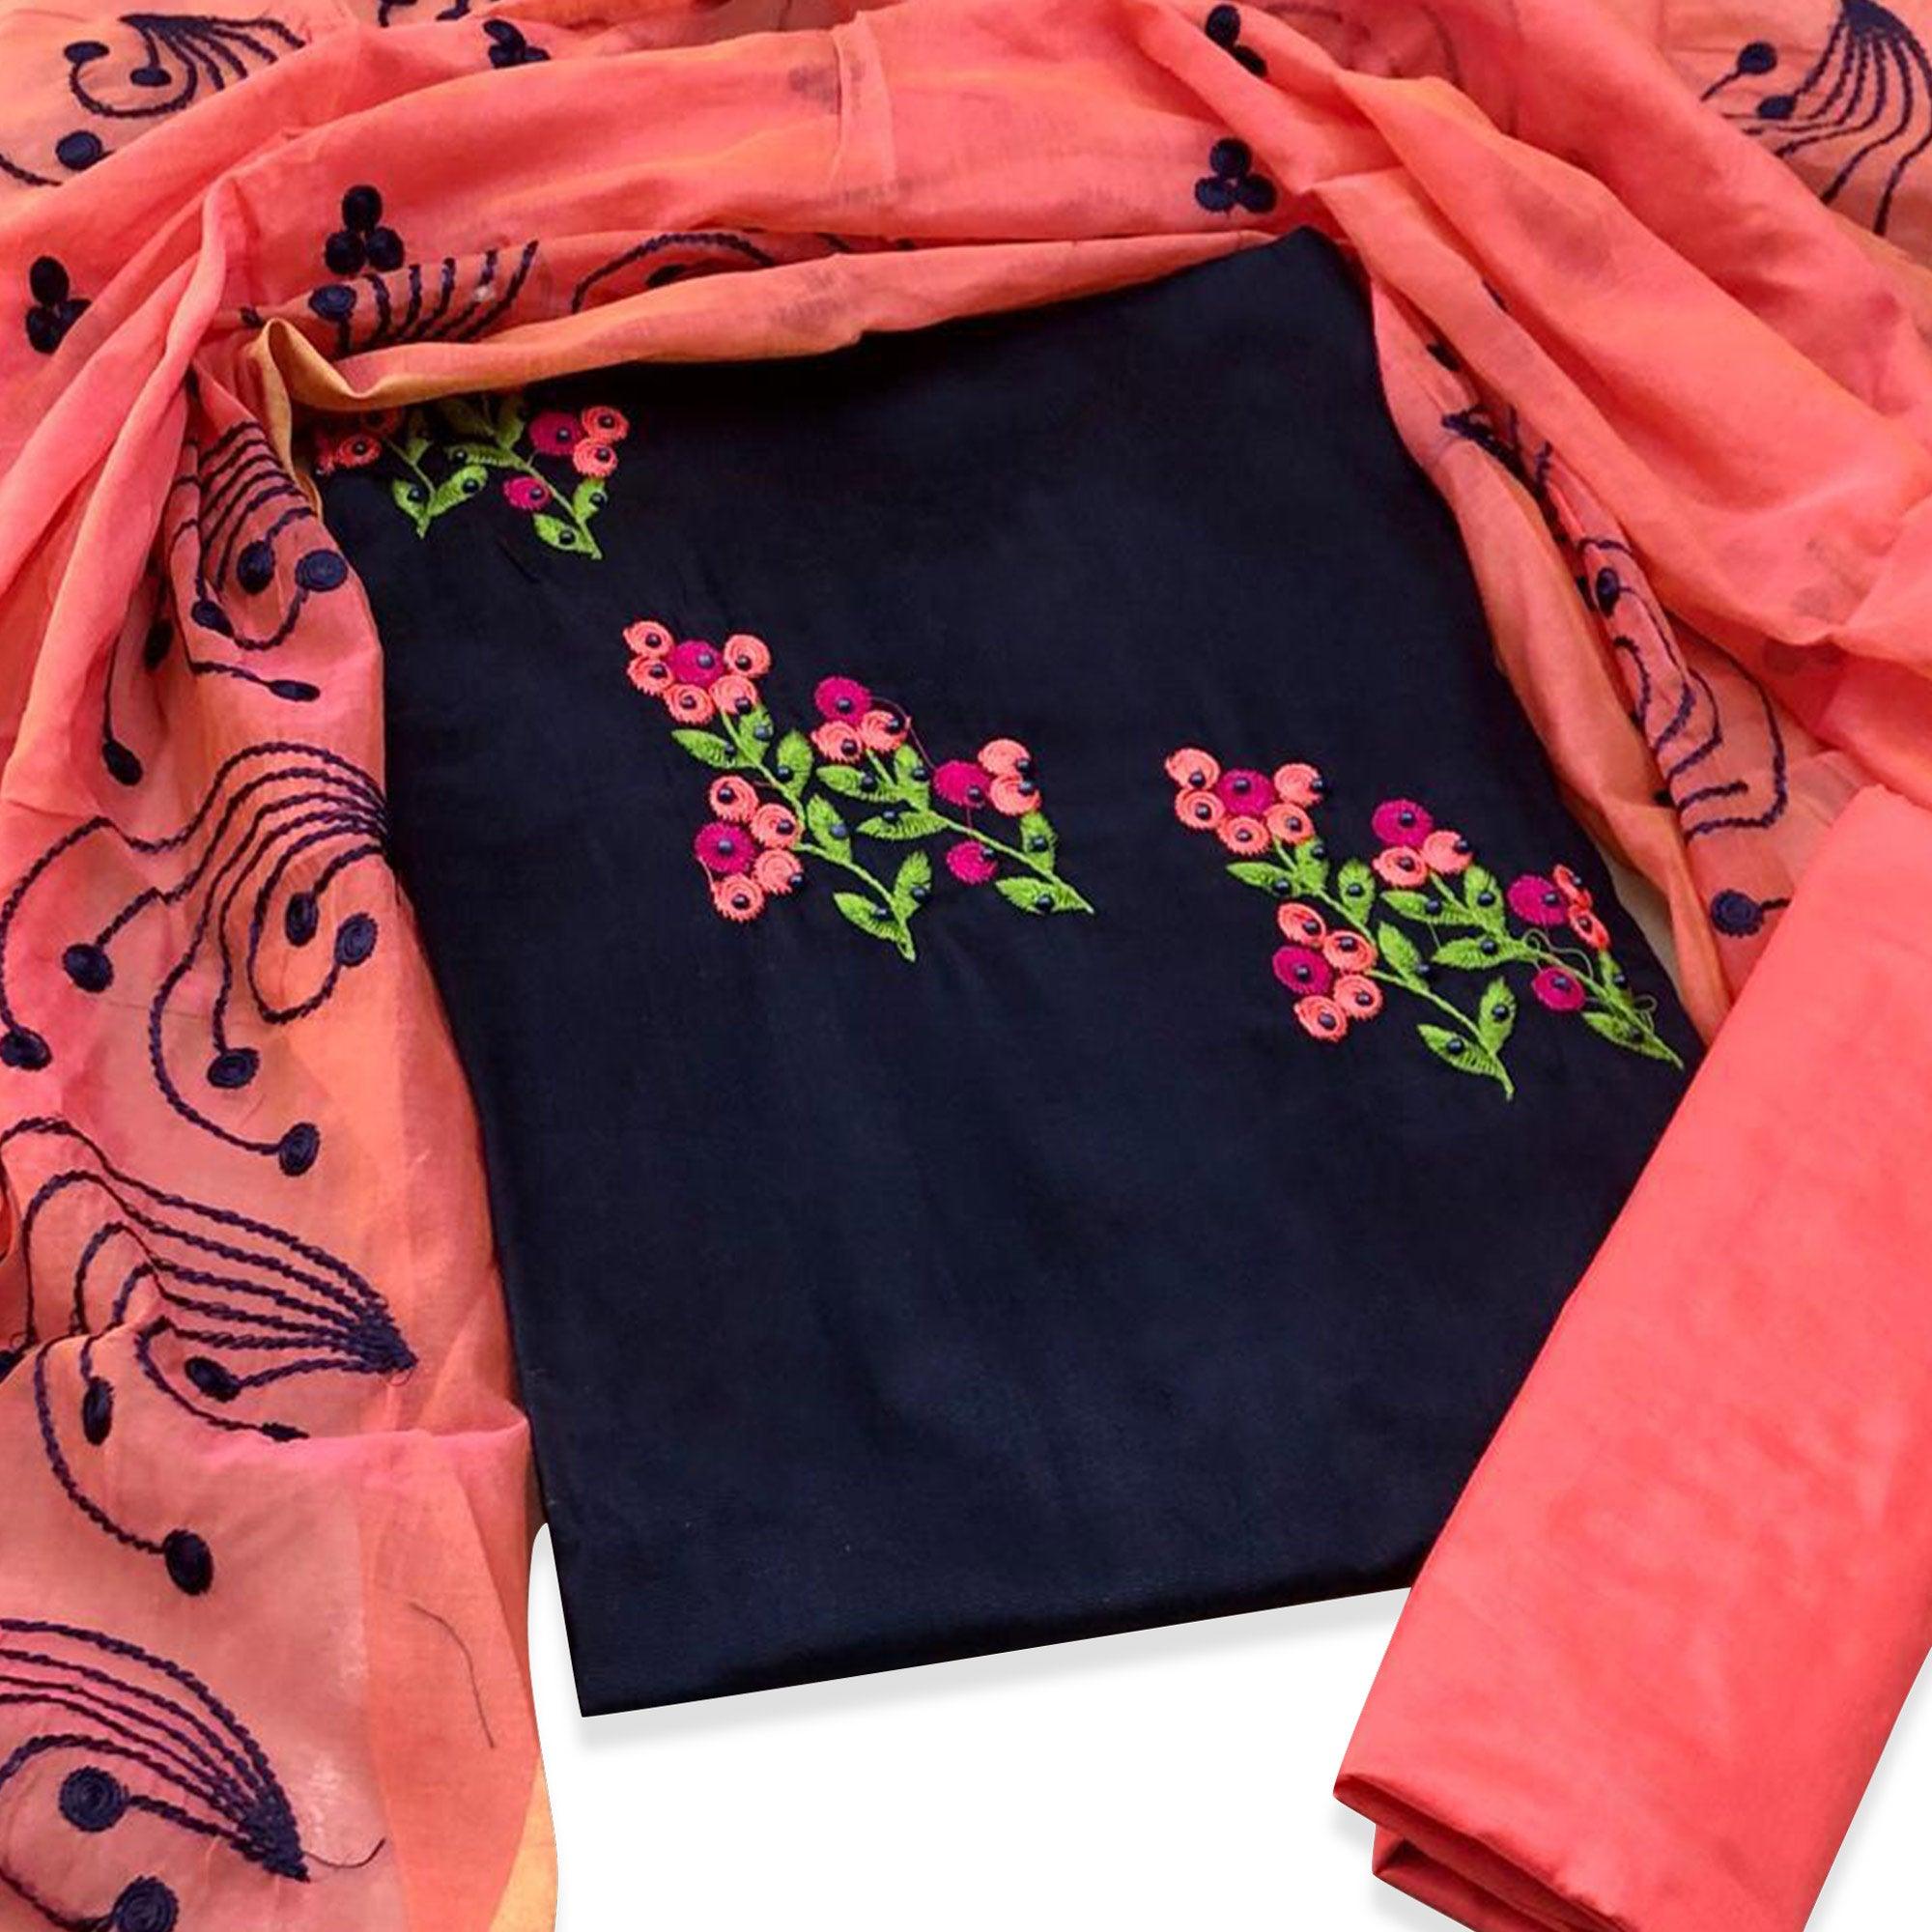 Mesmerising Navy Blue Colored Casual Wear Embroidered Cotton Dress Material - Peachmode